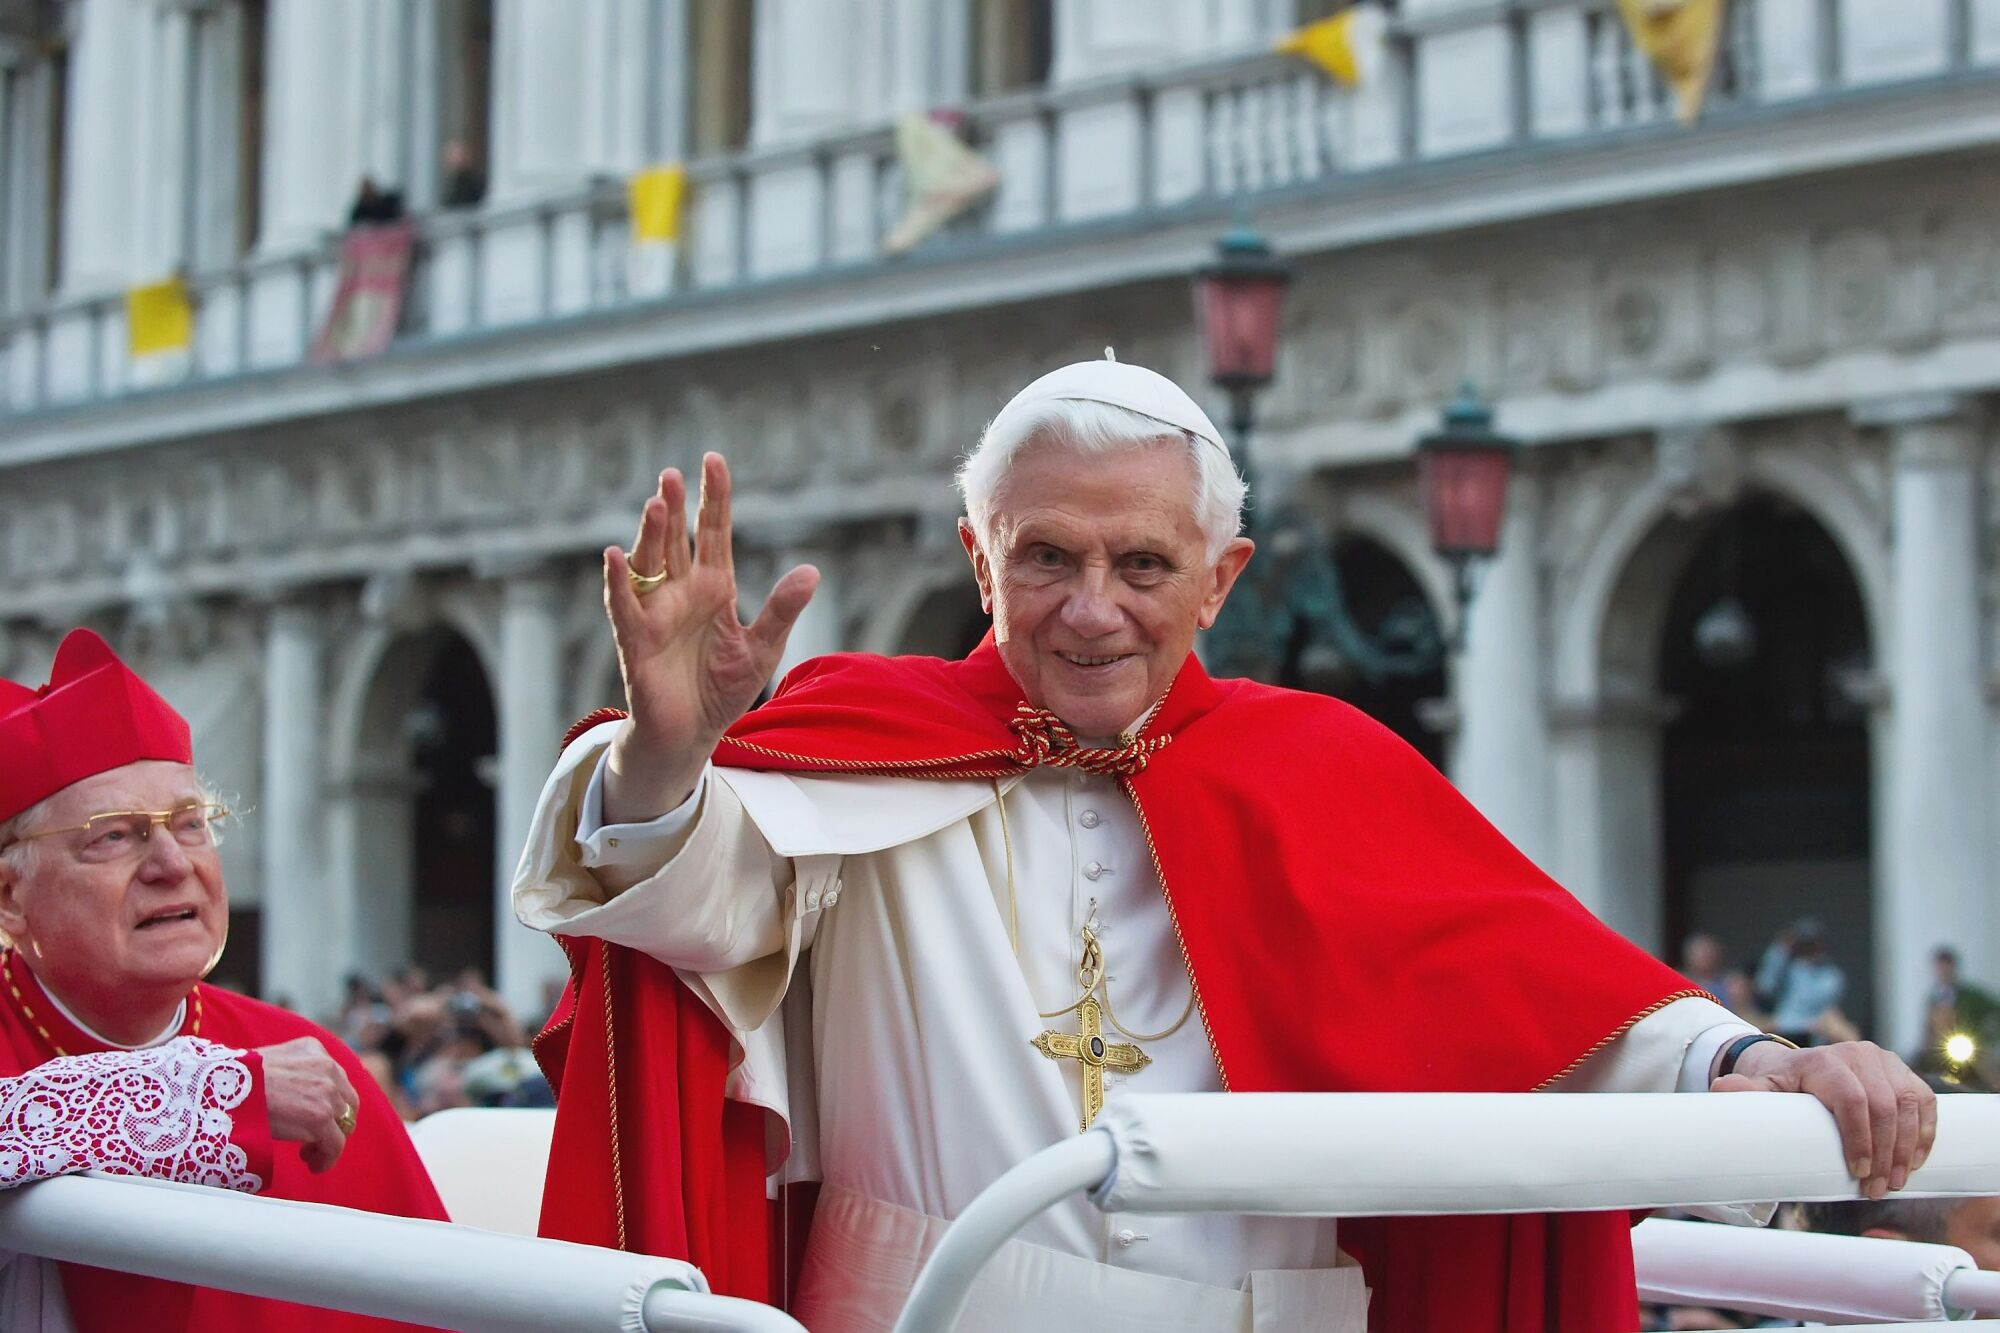 Pope Benedict XVI waves from a vehicle as another passenger looks on while they ride past a building.